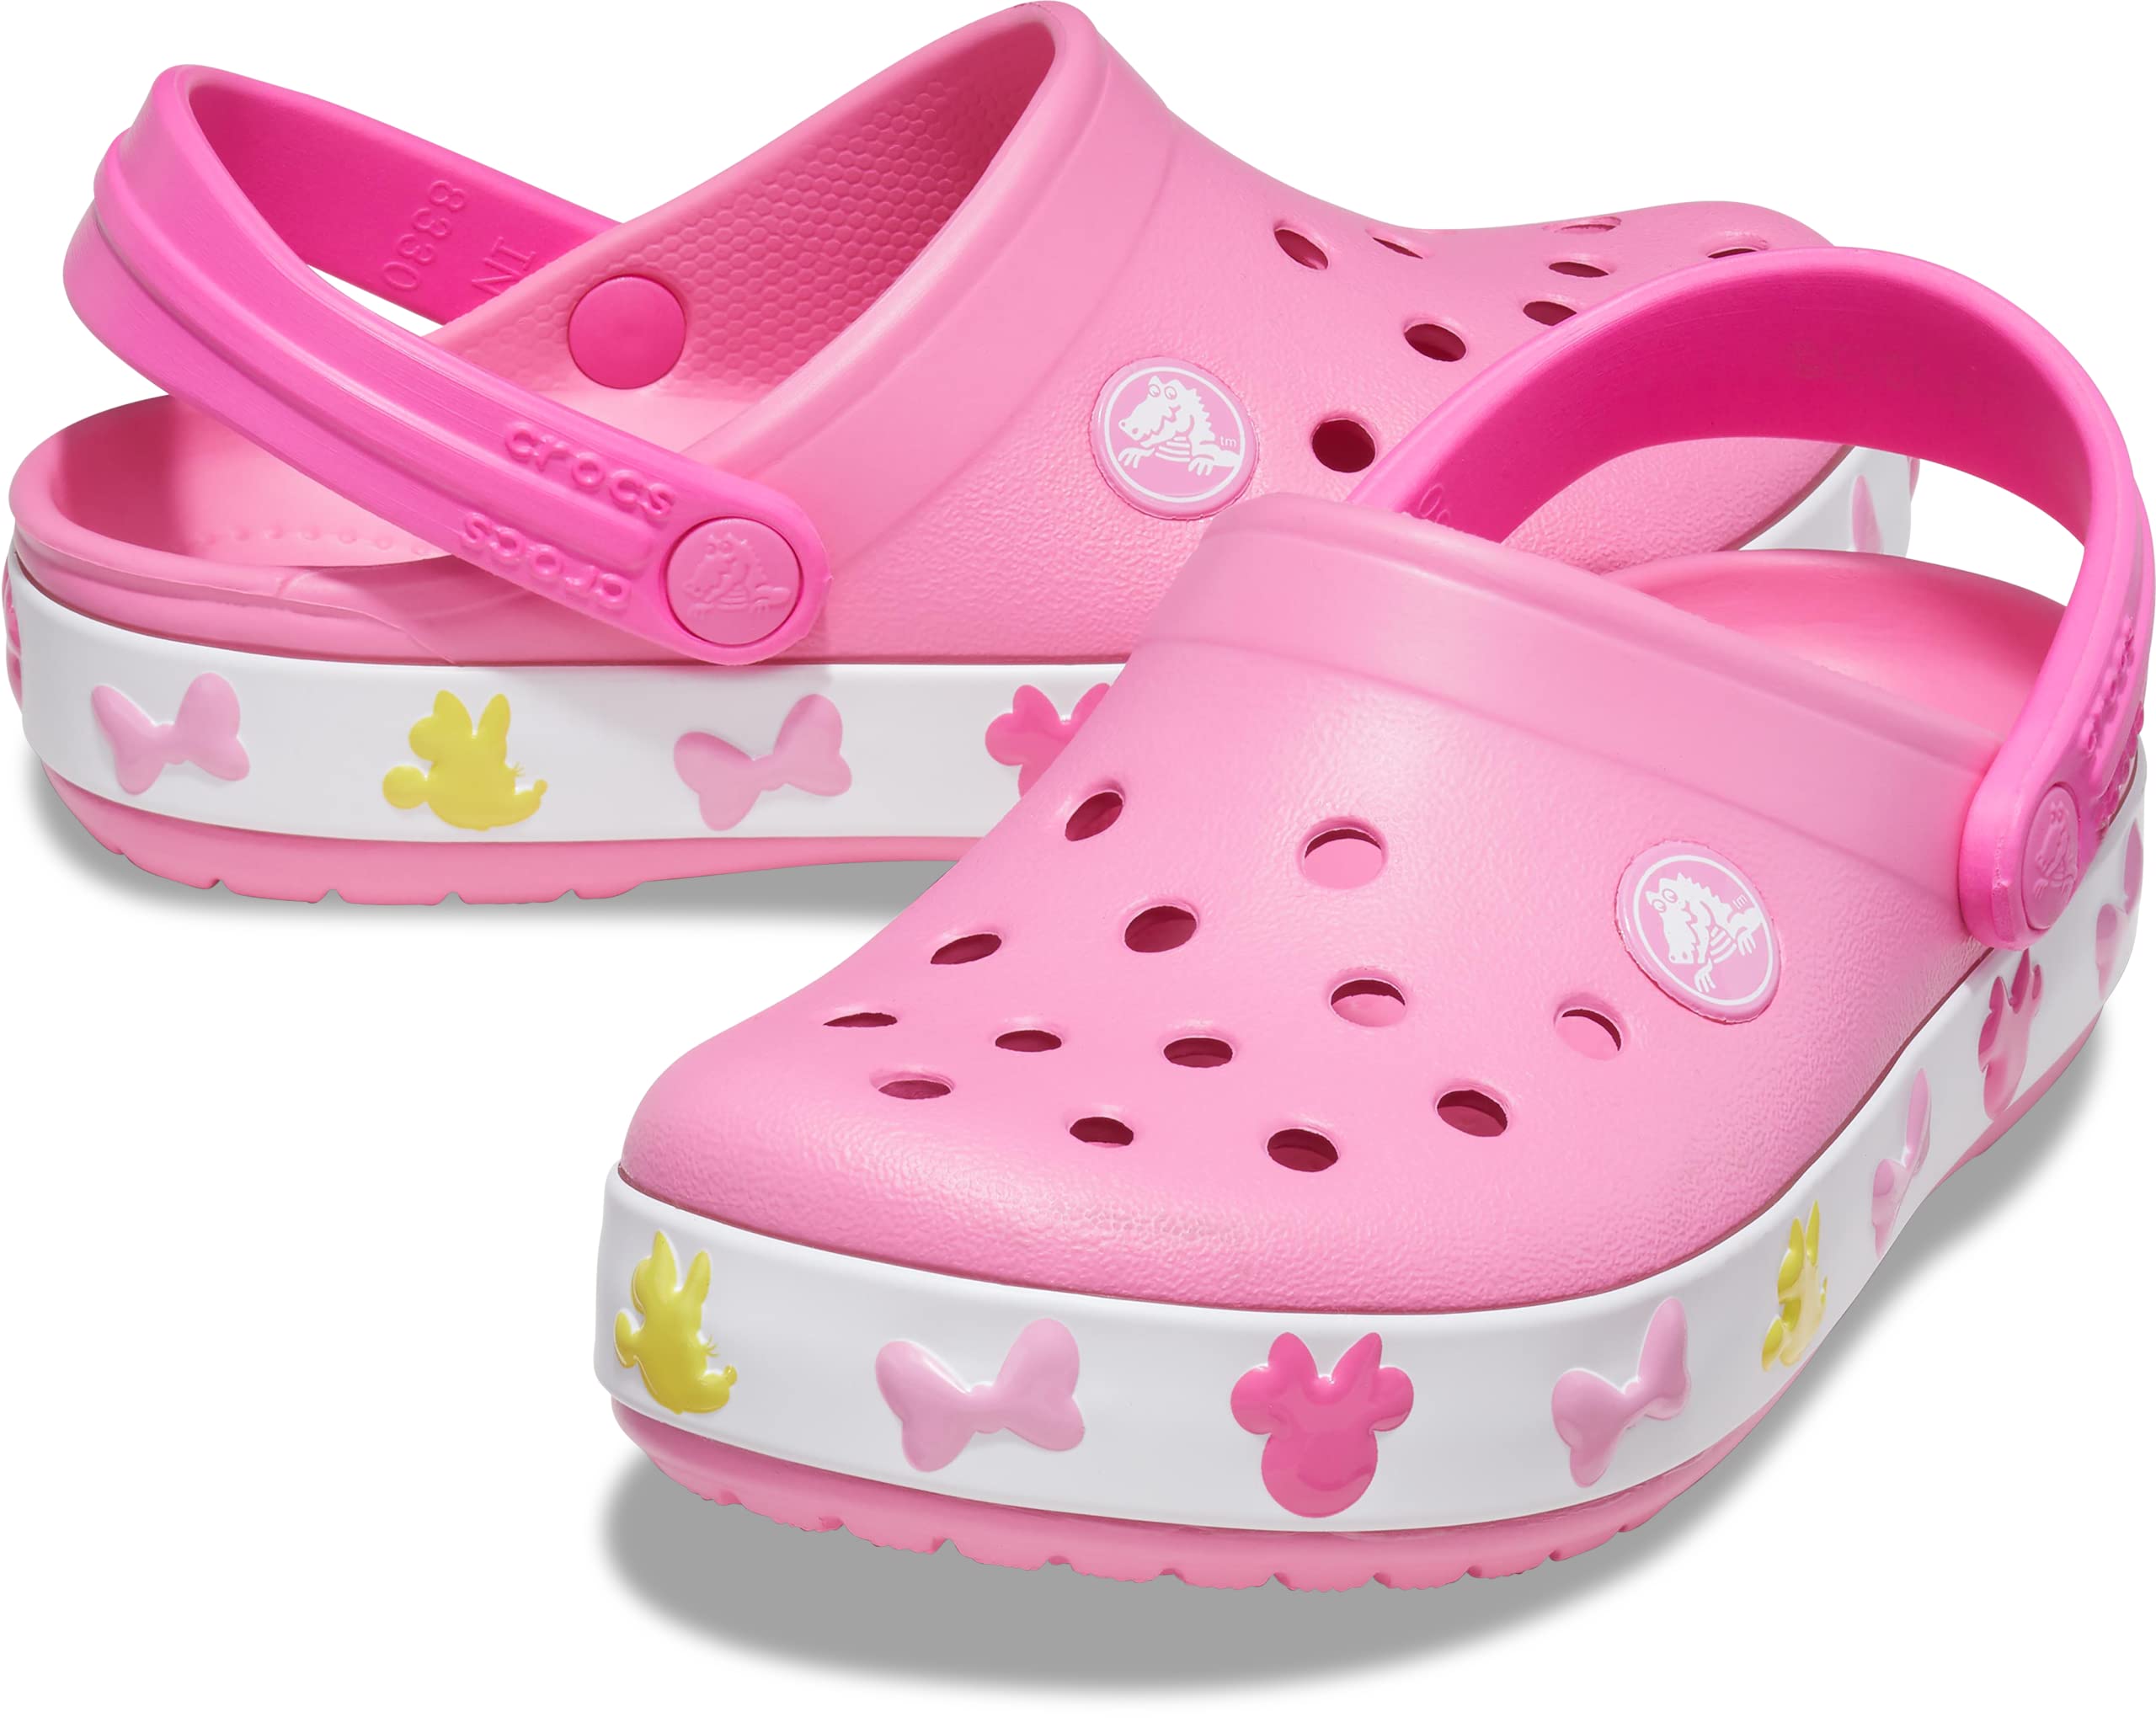 Crocs unisex-child Disney Mickey and Minnie Mouse Clogs, Light Up Shoes